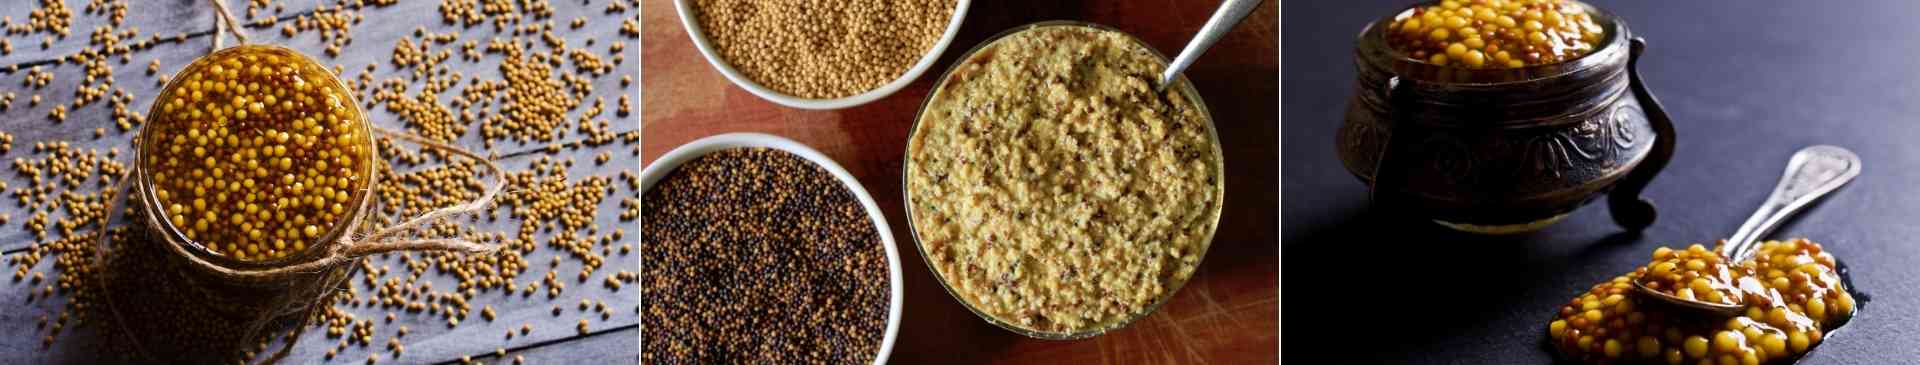 How to Make Mustard Condiment from Seeds